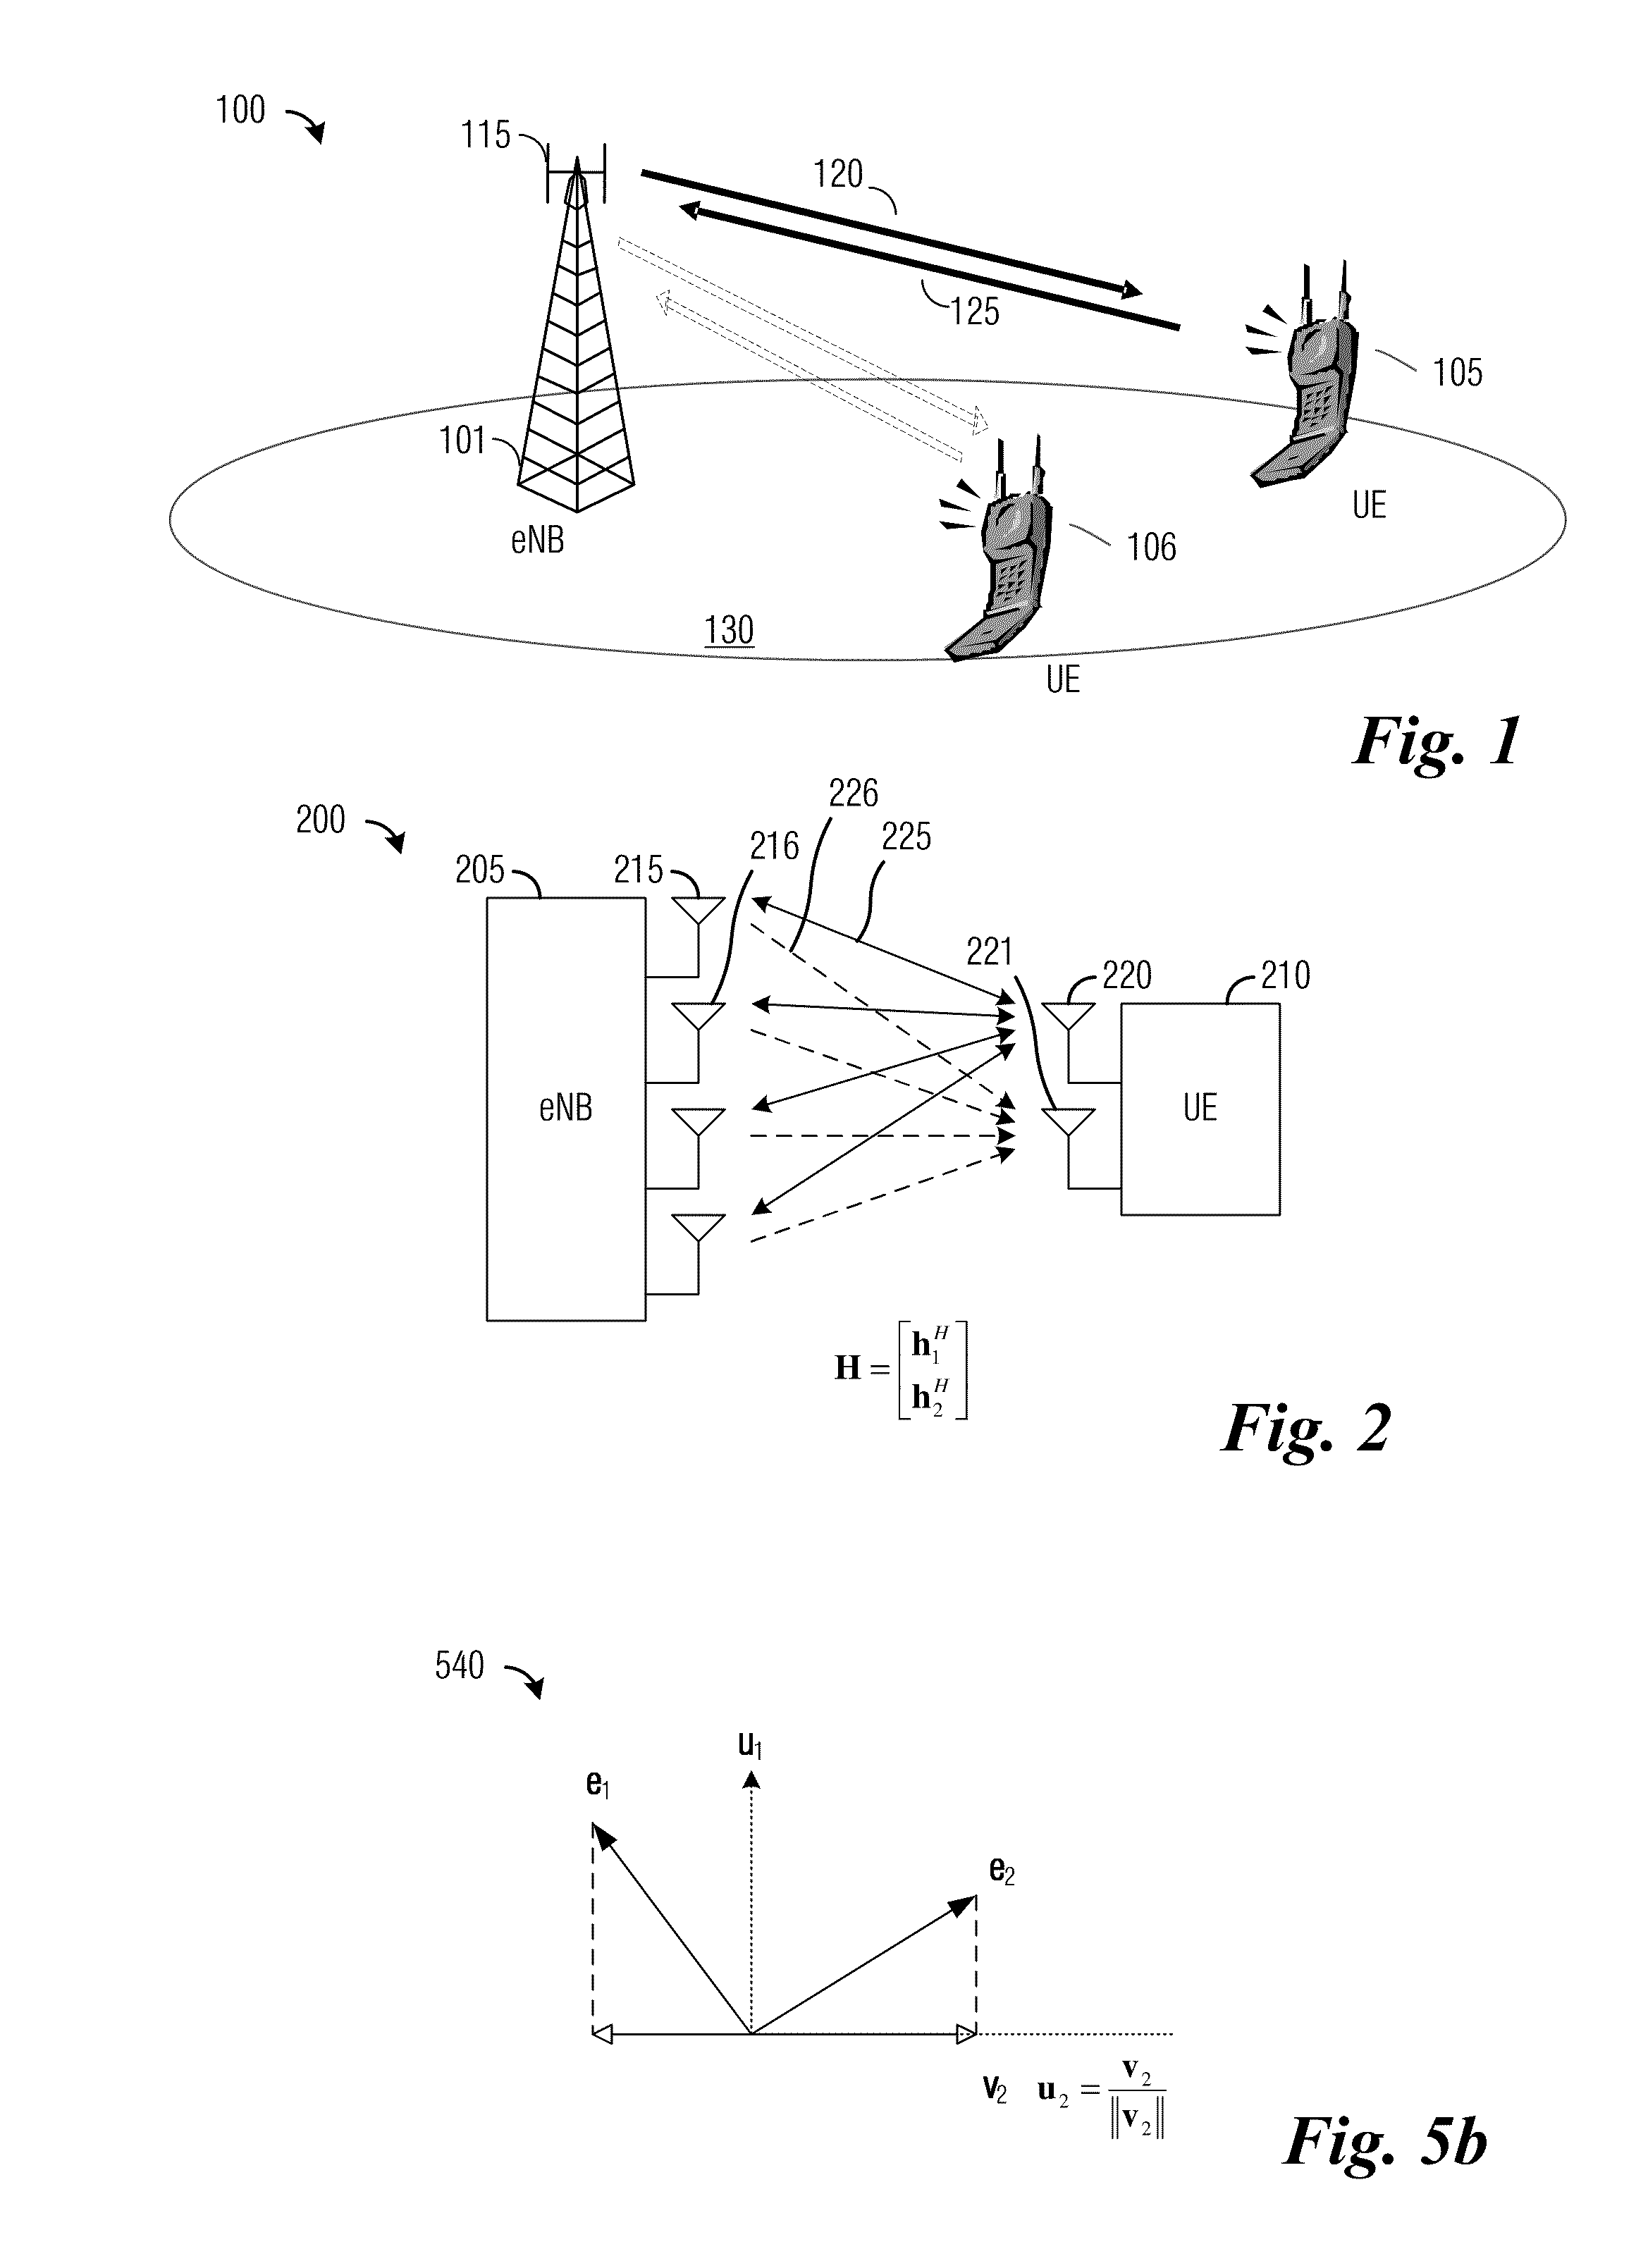 System and Method for Wireless Communications Using Spatial Multiplexing with Incomplete Channel Information